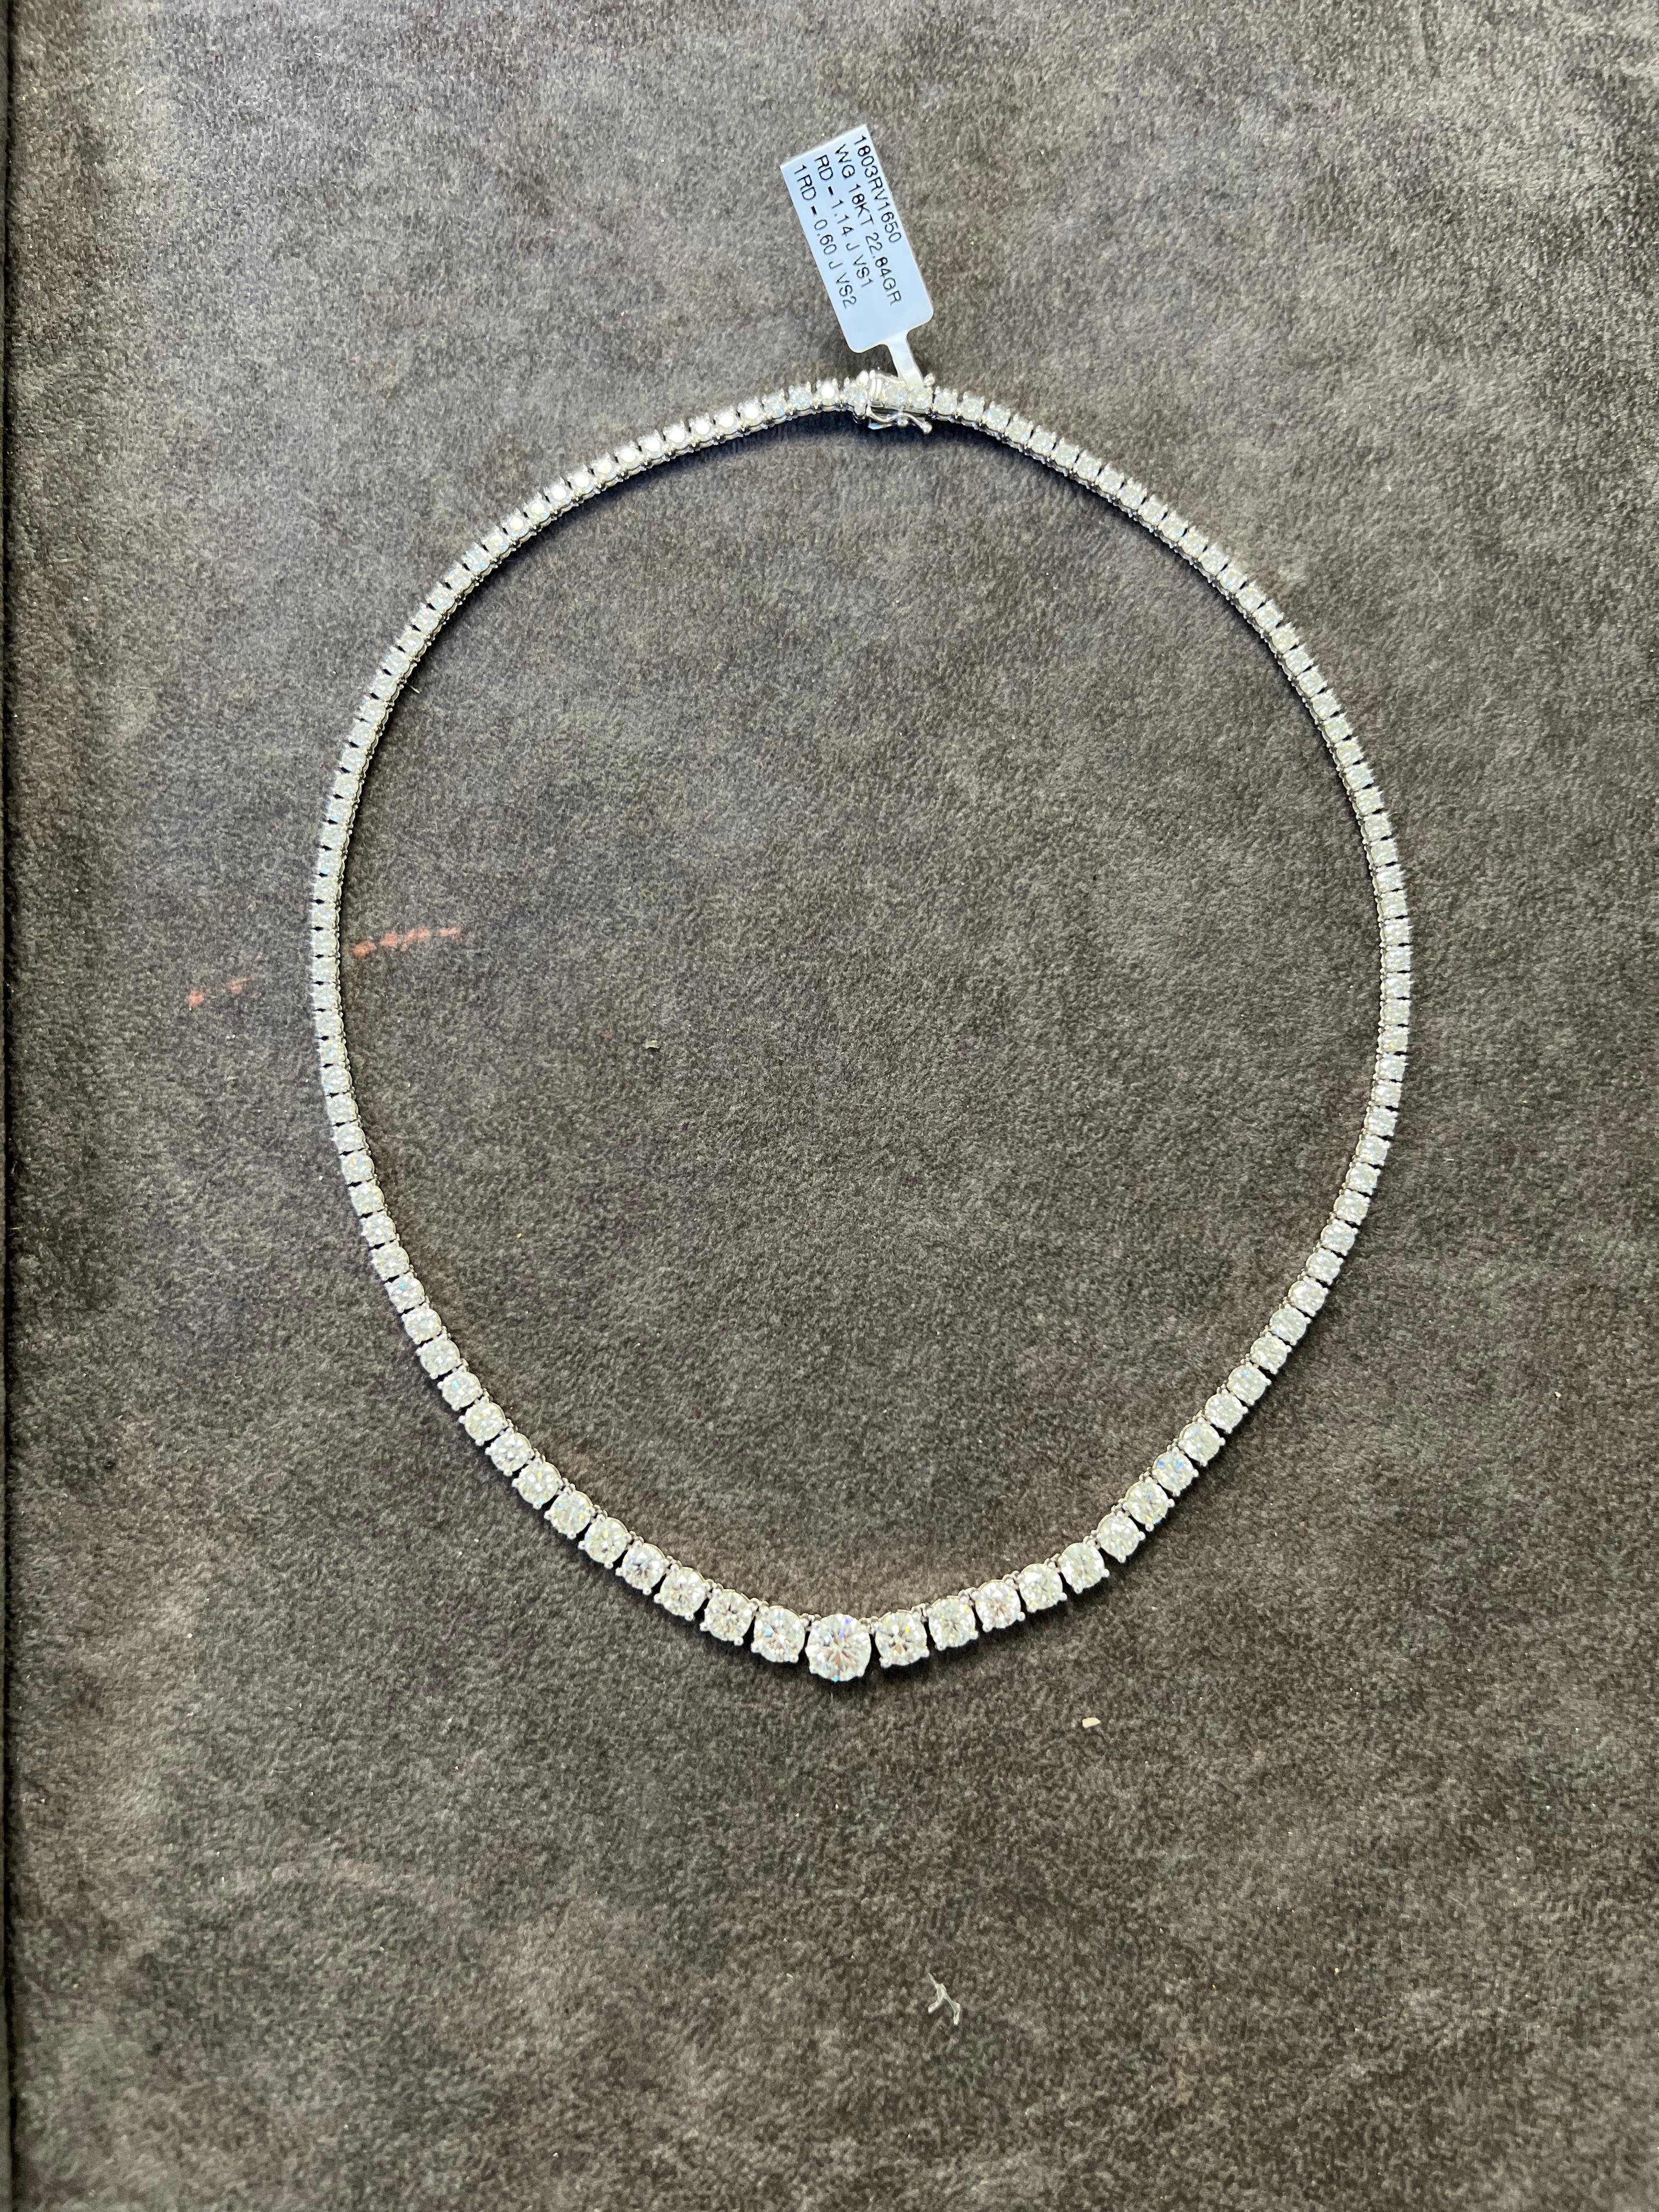 Beautiful and classic diamond tennis riviera necklace, GIA certified, by Alexander Beverly Hills.
18.03 carats total diamond weight
Center stone 1.14ct GIA certified. 
115 round brilliant diamonds, 18.03 carats, 3 stones GIA certified. Approximately